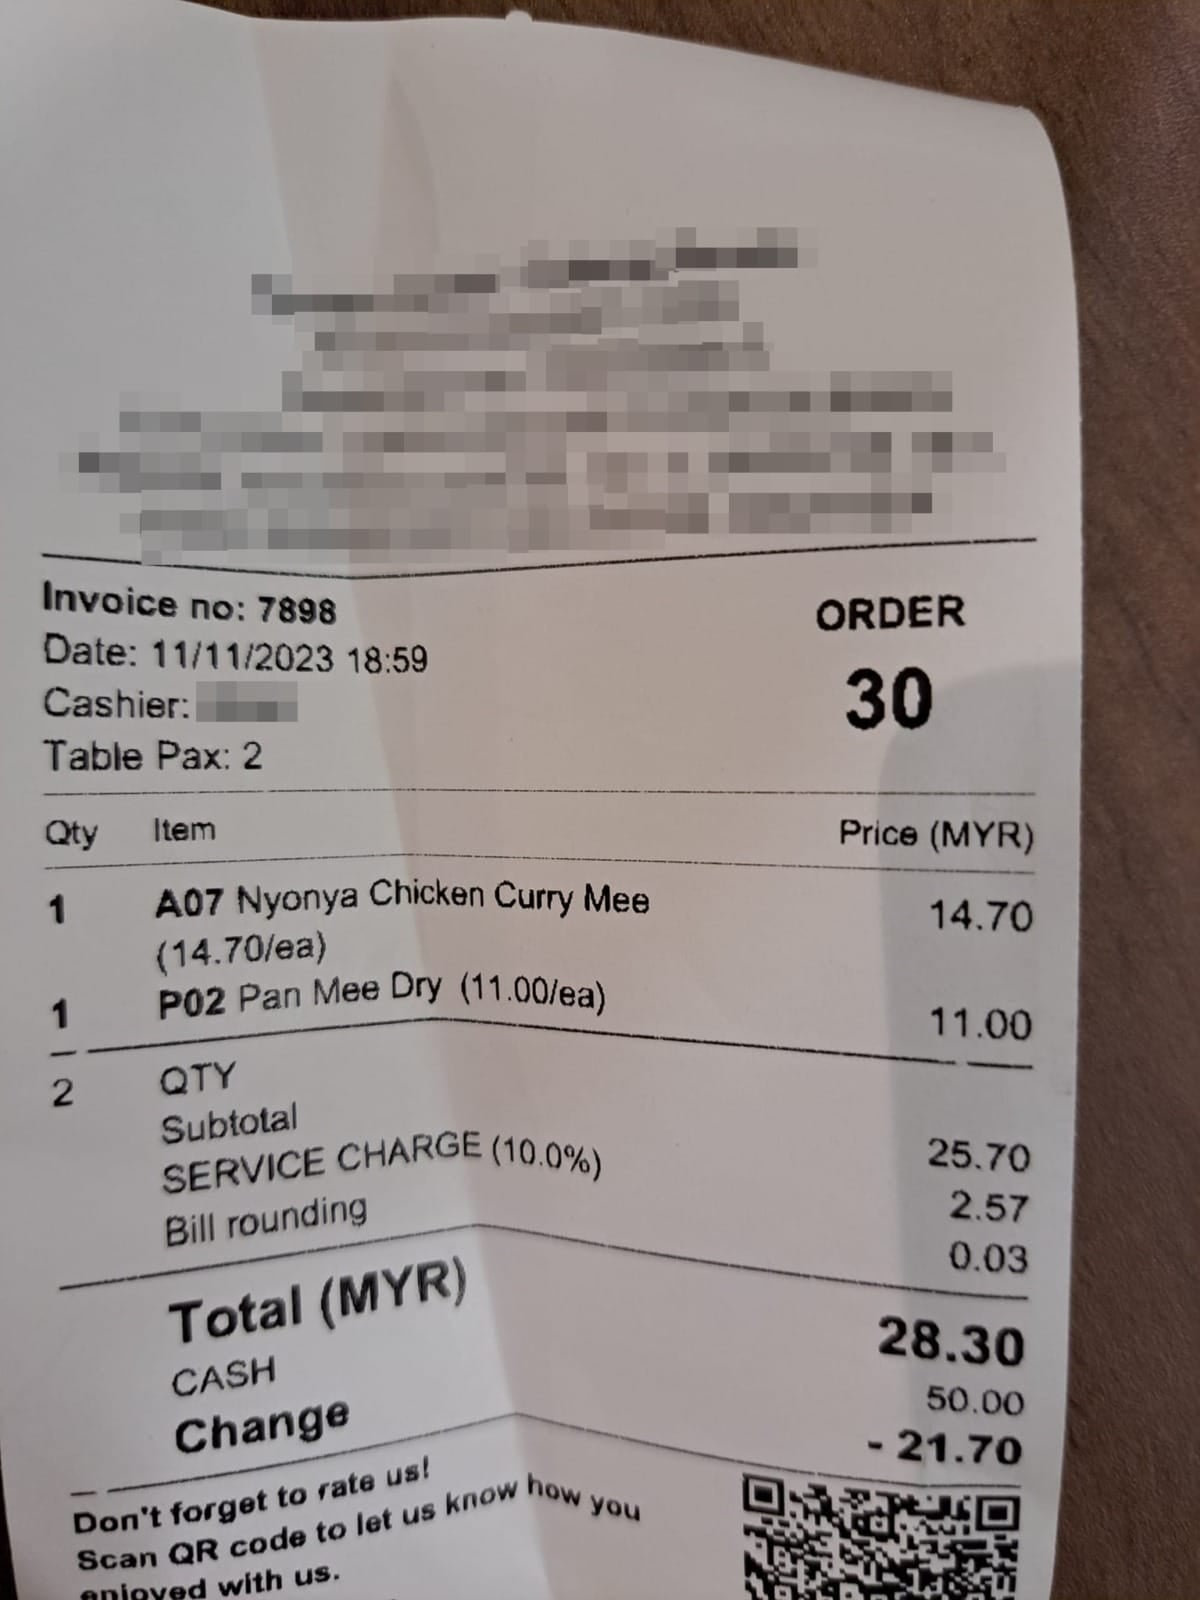 Rm28.27 Bill Total Rounds Up Wrongly To Rm28.30